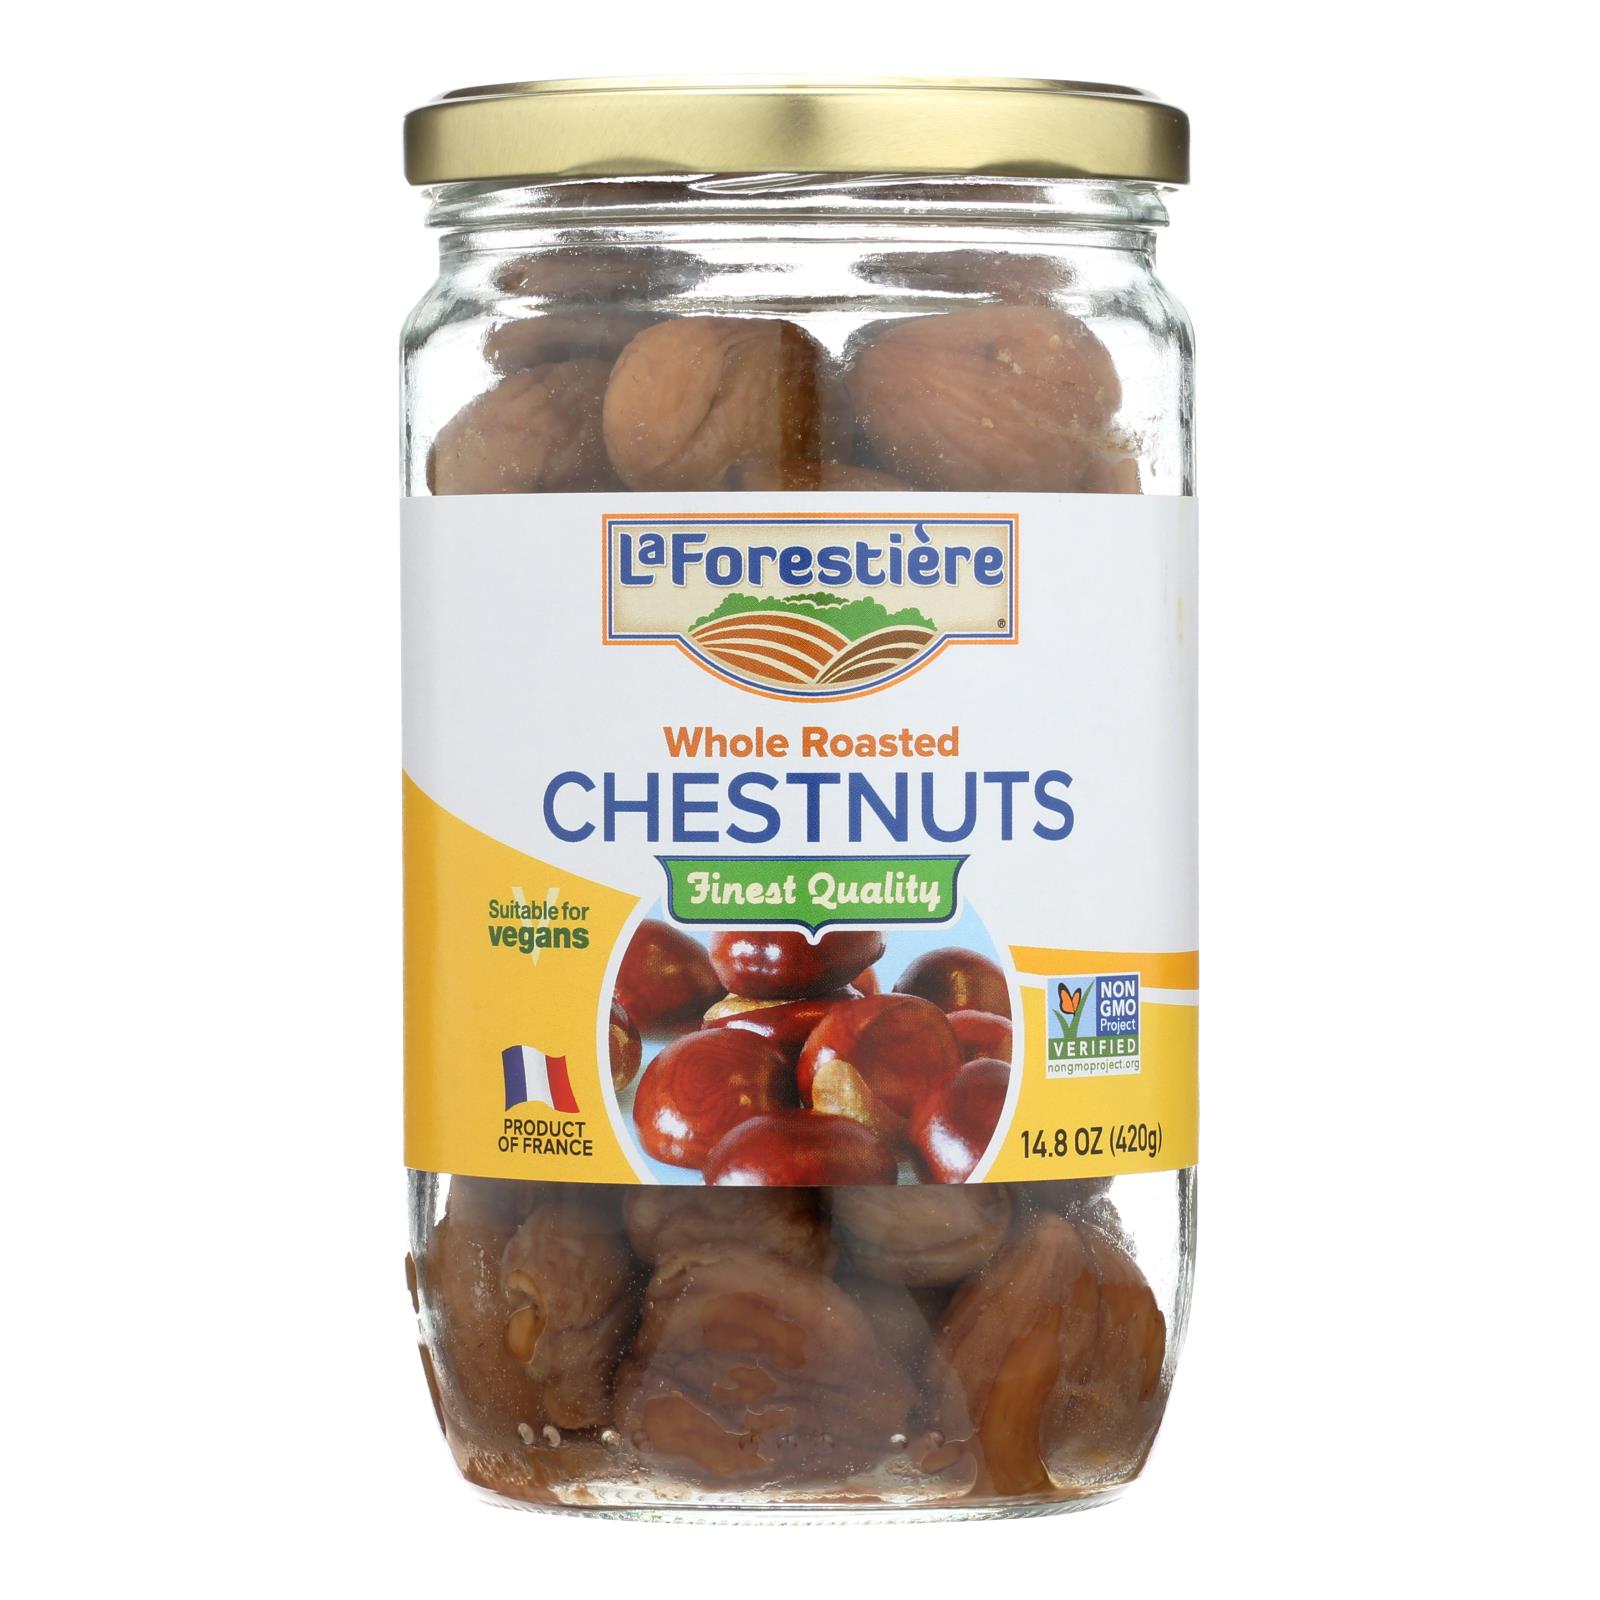 La Forestiere All-Natural Whole Roasted Chestnuts - 12개 묶음상품 - 14.8 OZ